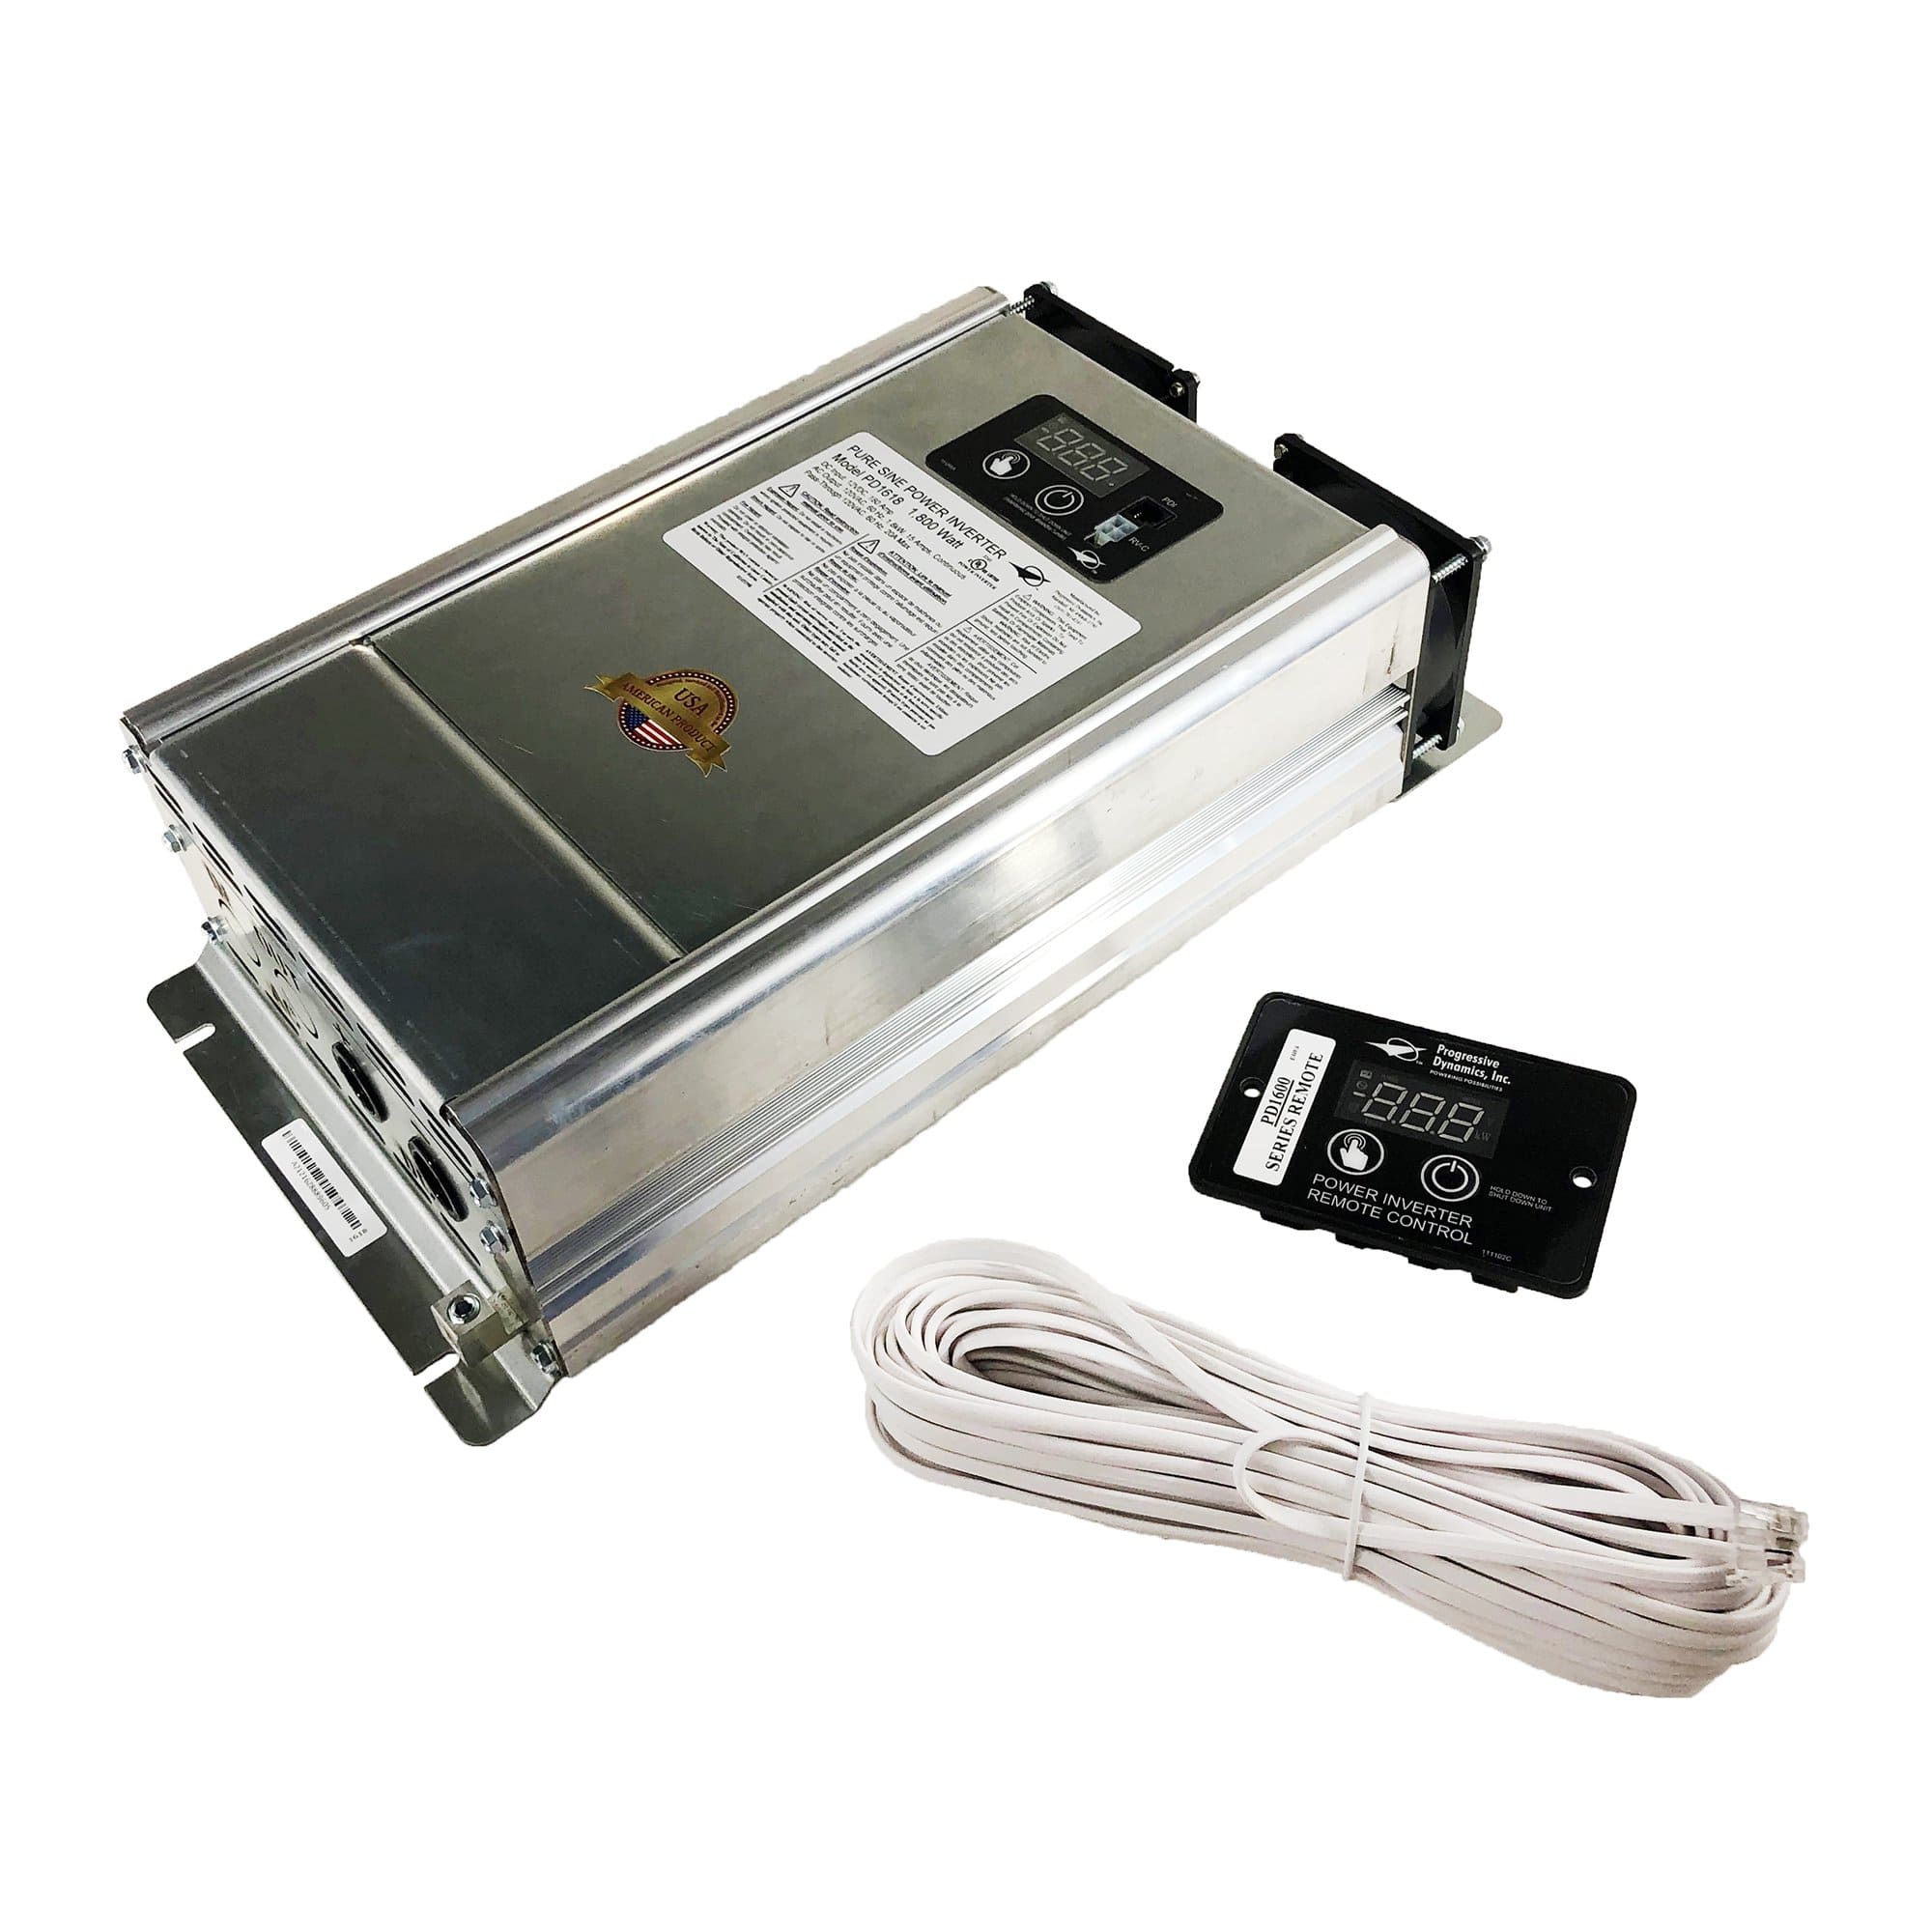 PDY 1800W 120V 1.8kW Pd1600 Series Inverter | PDYPD1618A